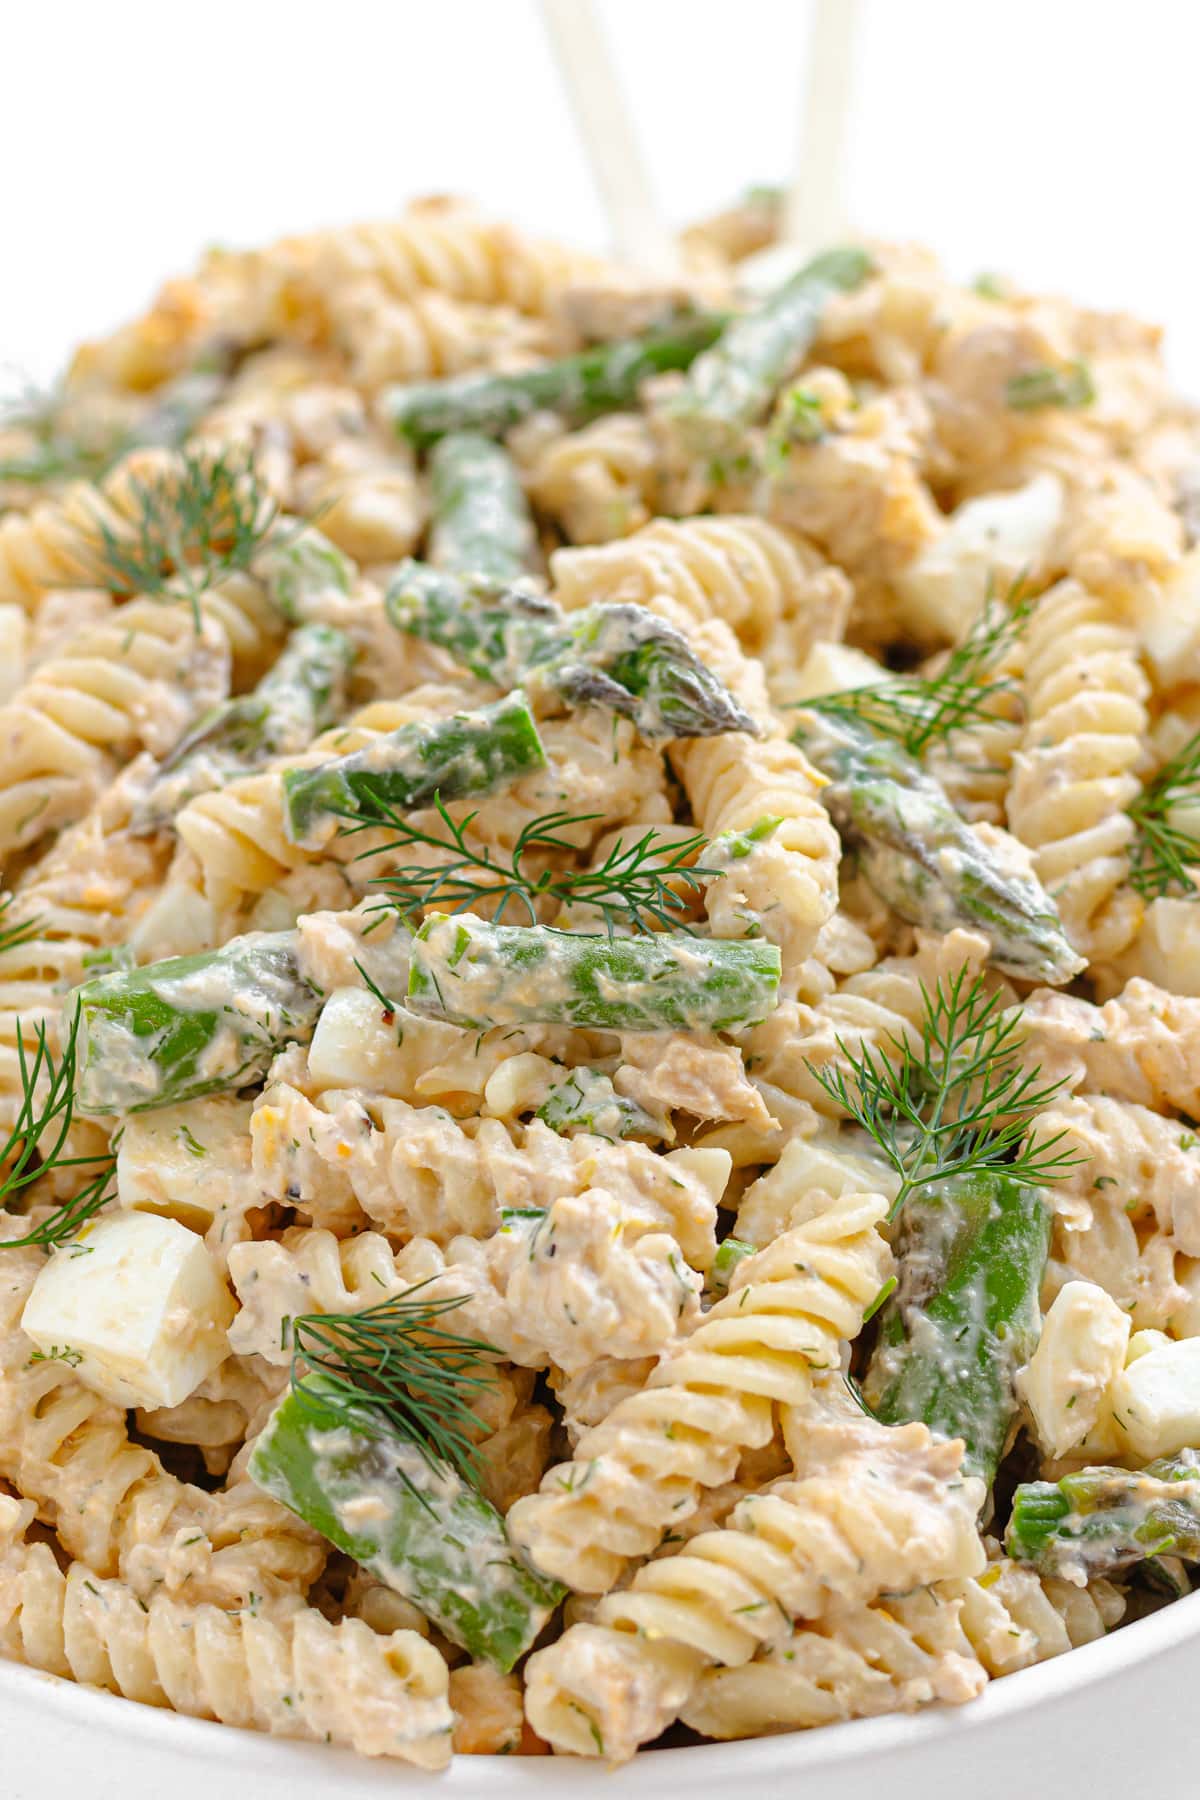 Creamy salmon pasta salad piled up in a white serving dish.